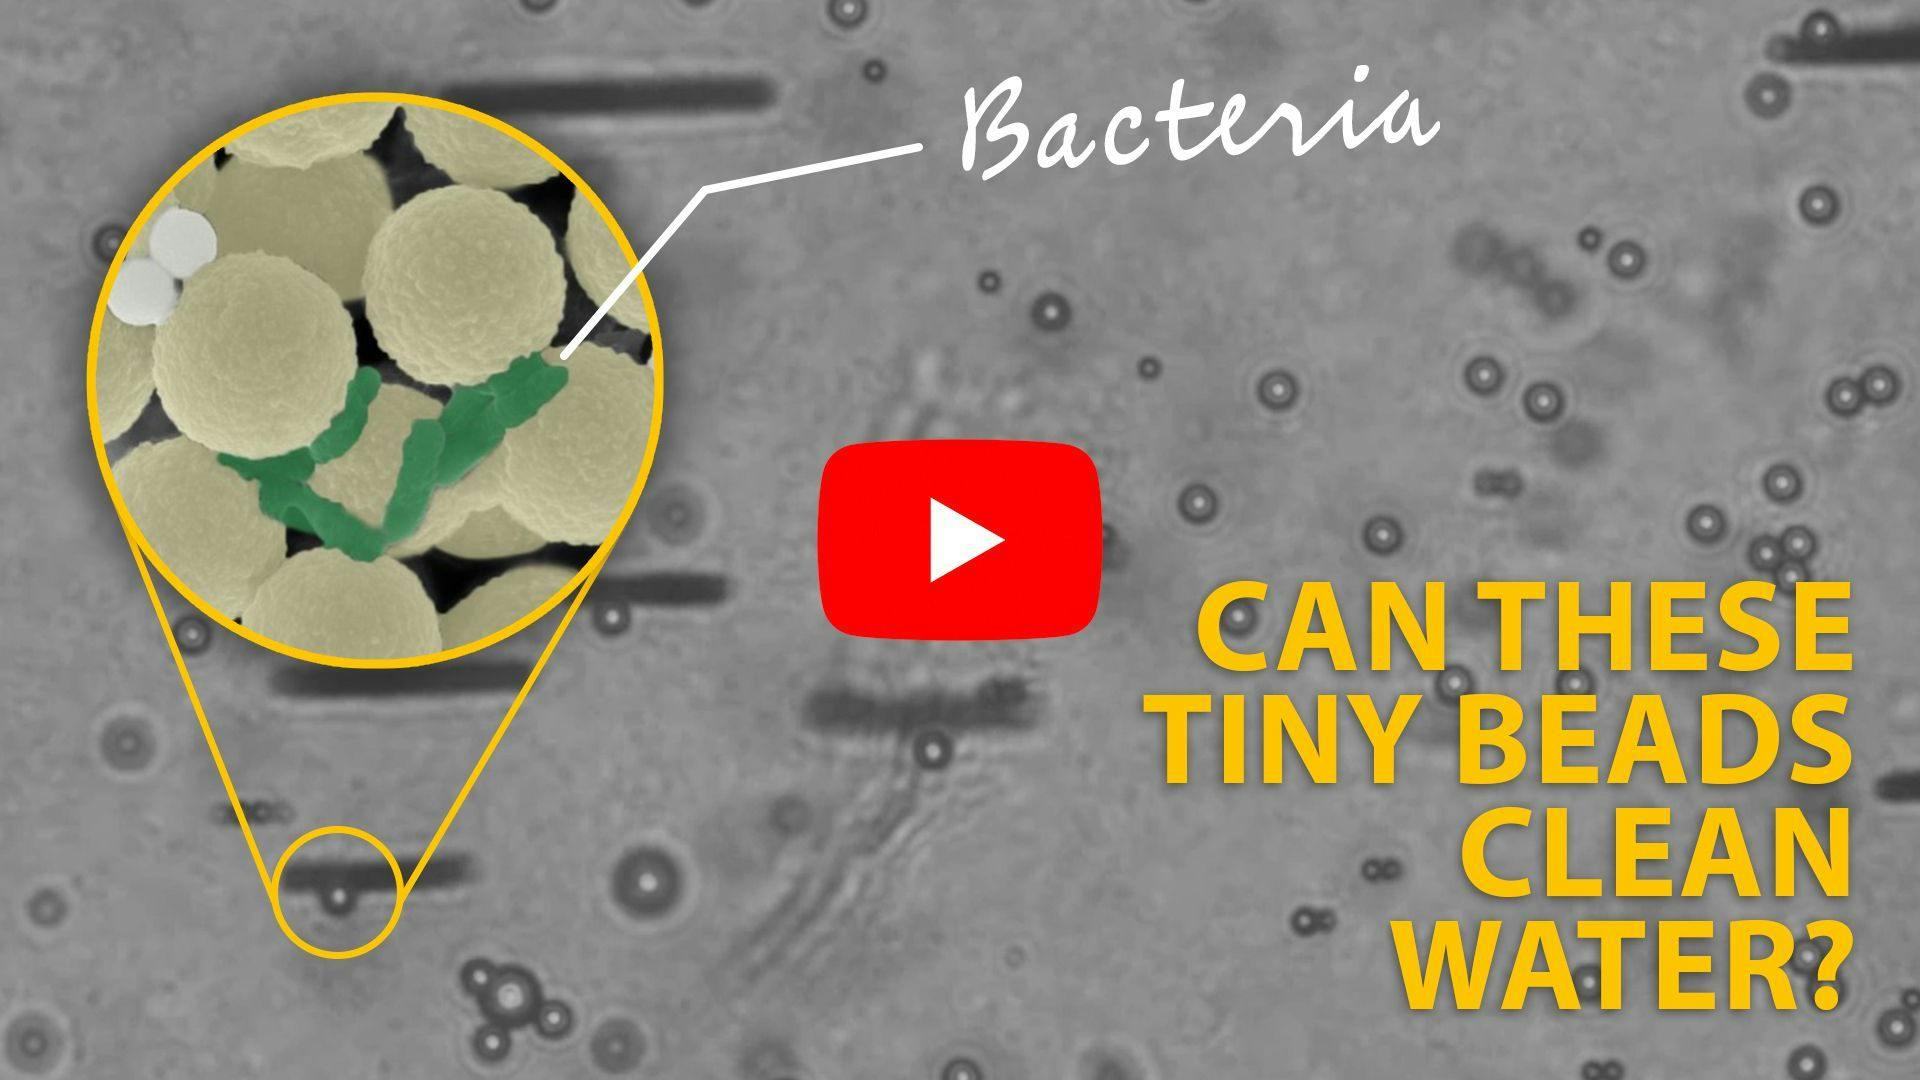 Headline Science: Can These Tiny Beads Clean Water?